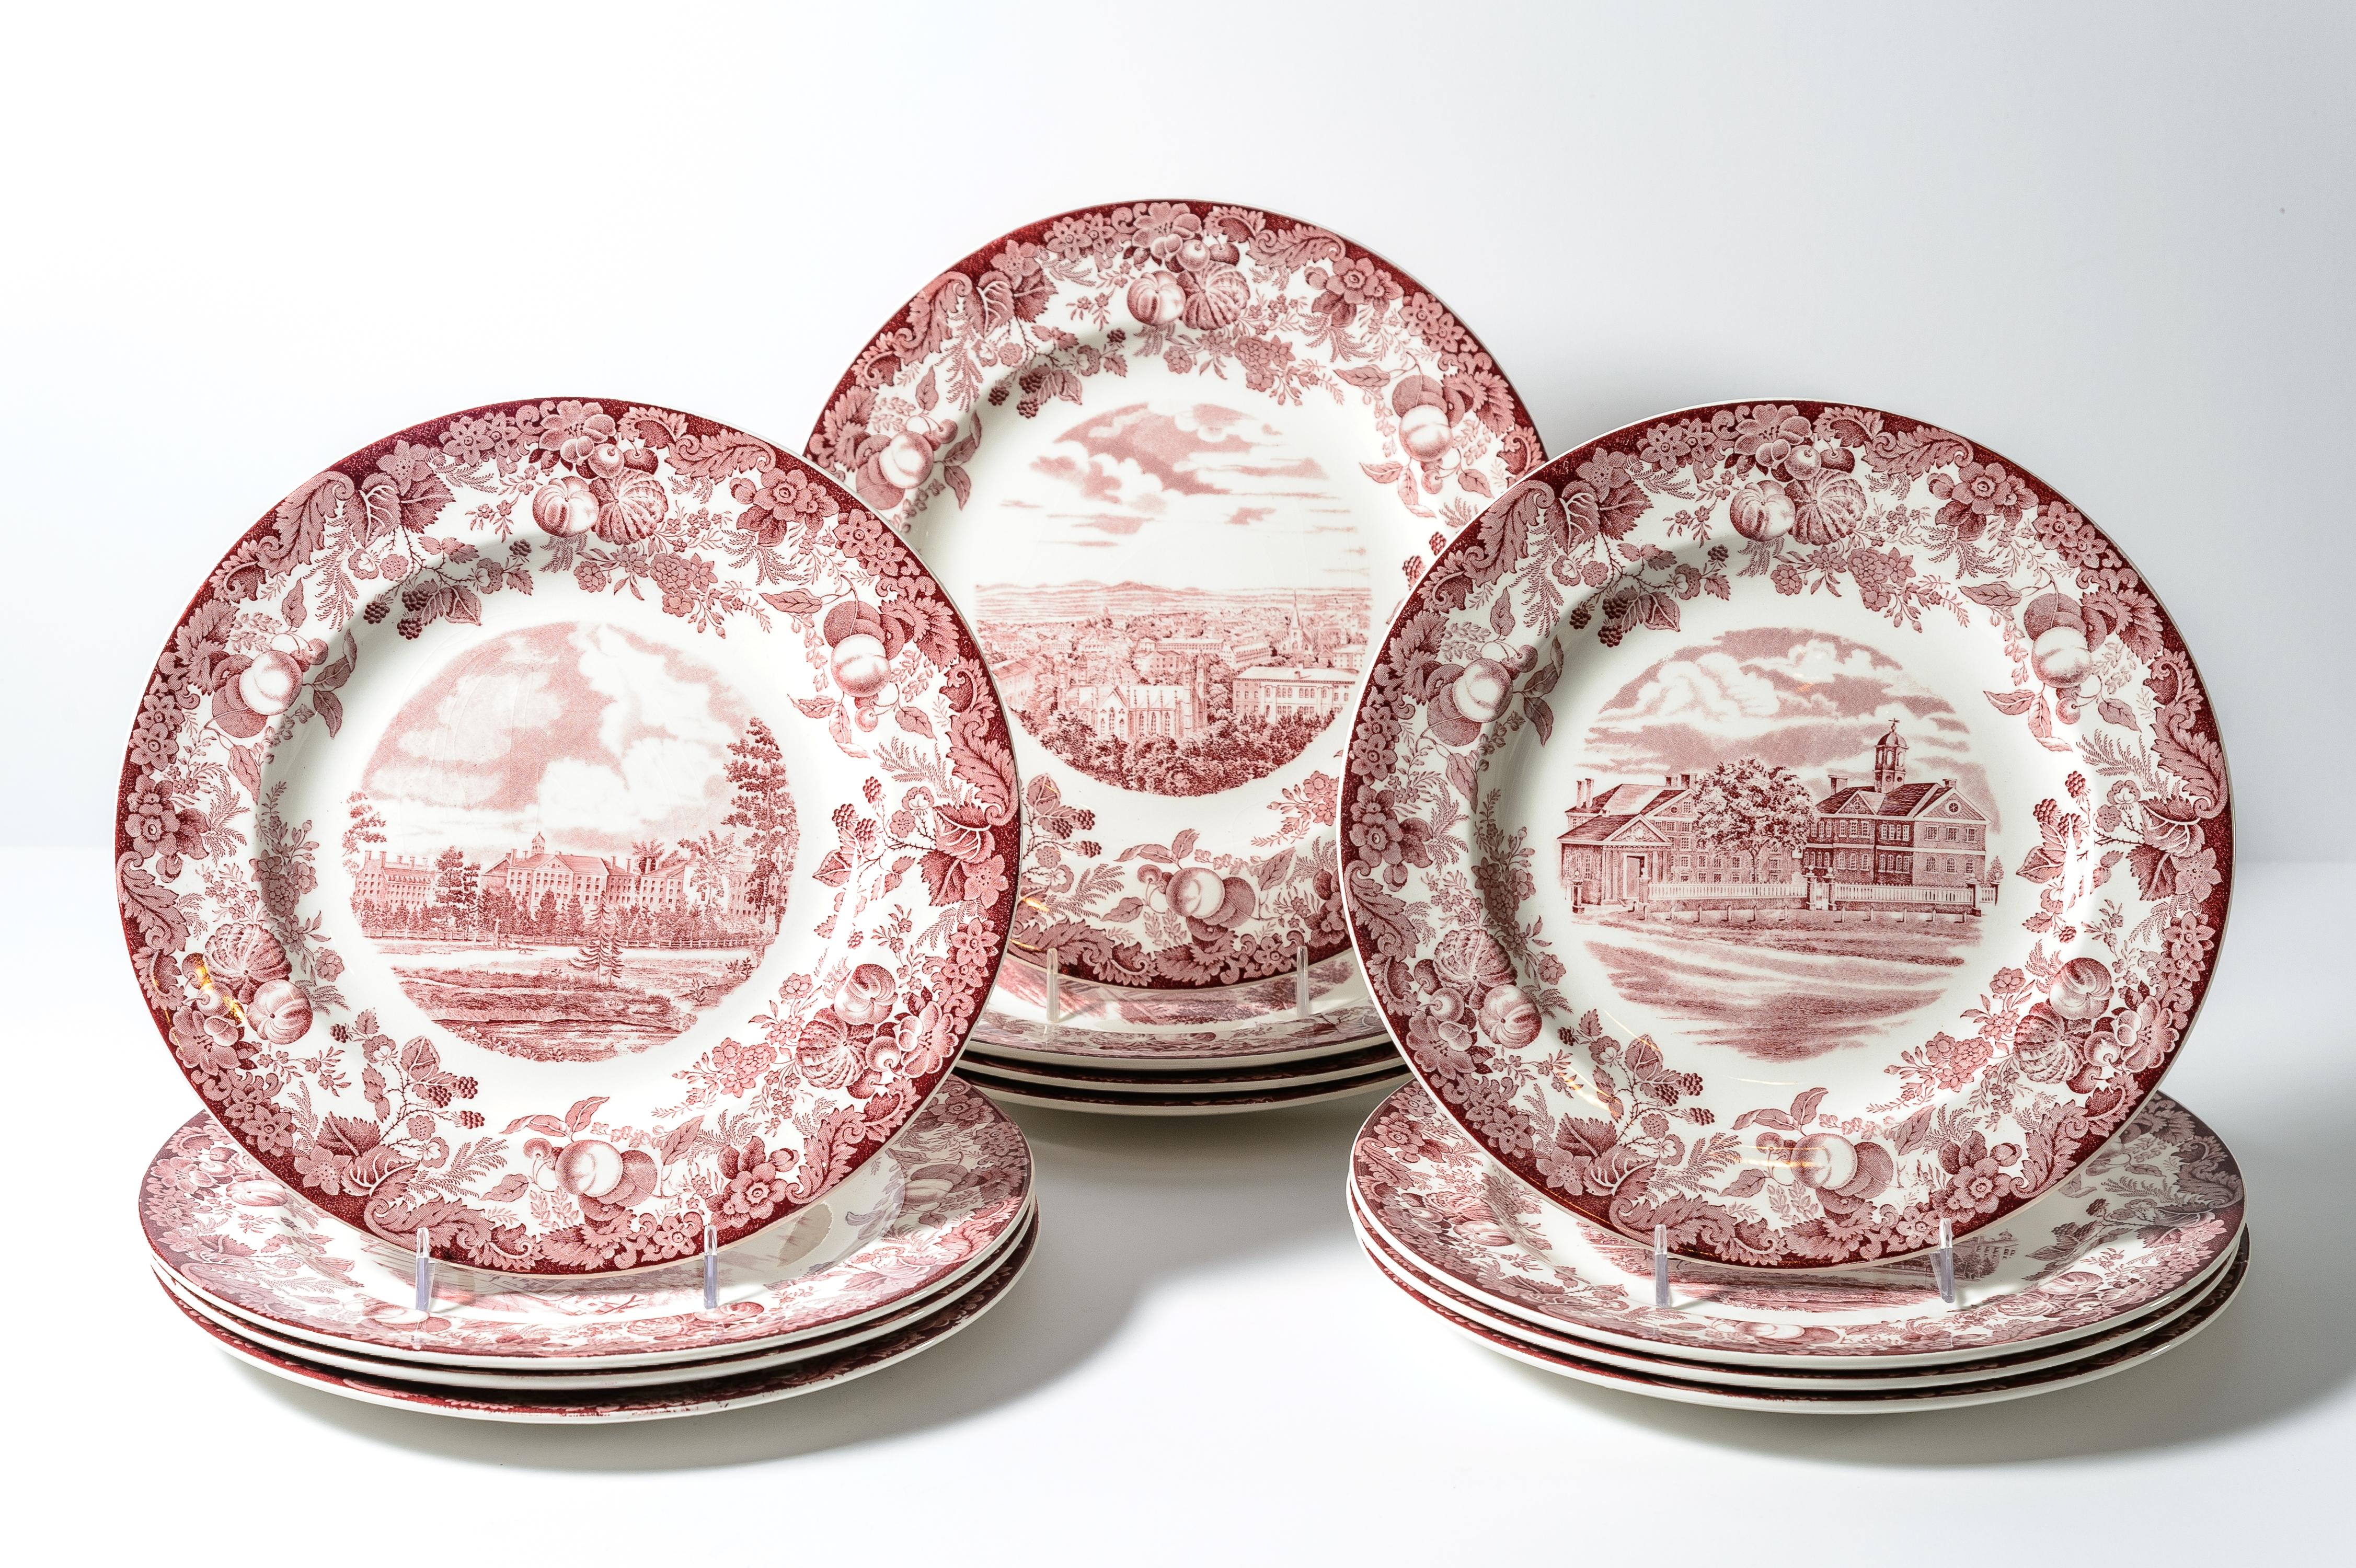 Hand-Crafted 12 Harvard University Dinner Plates by Wedgwood, England, circa 1952